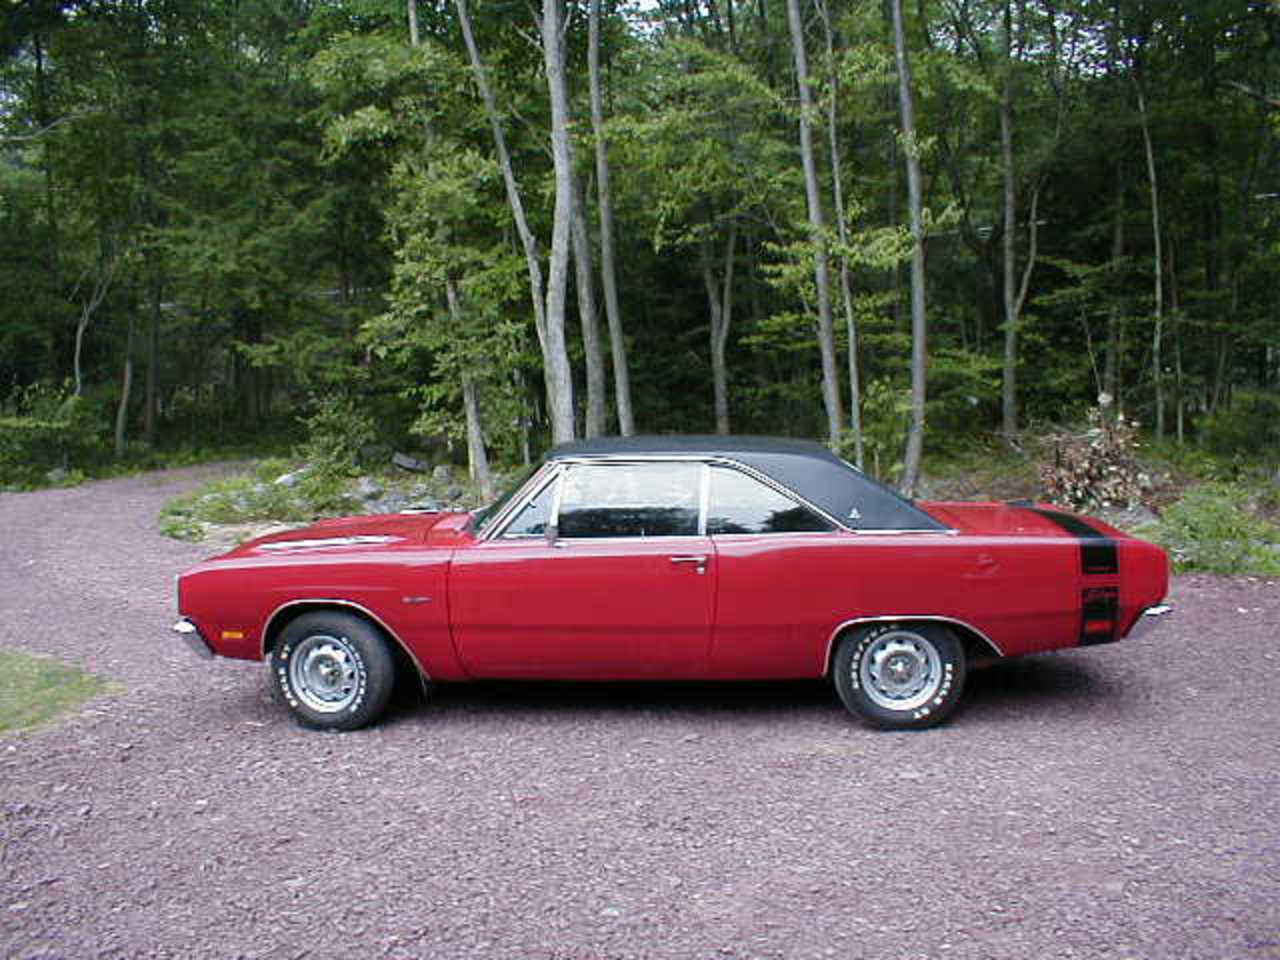 Dodge Dart 340 - huge collection of cars, auto news and reviews, car vitals,